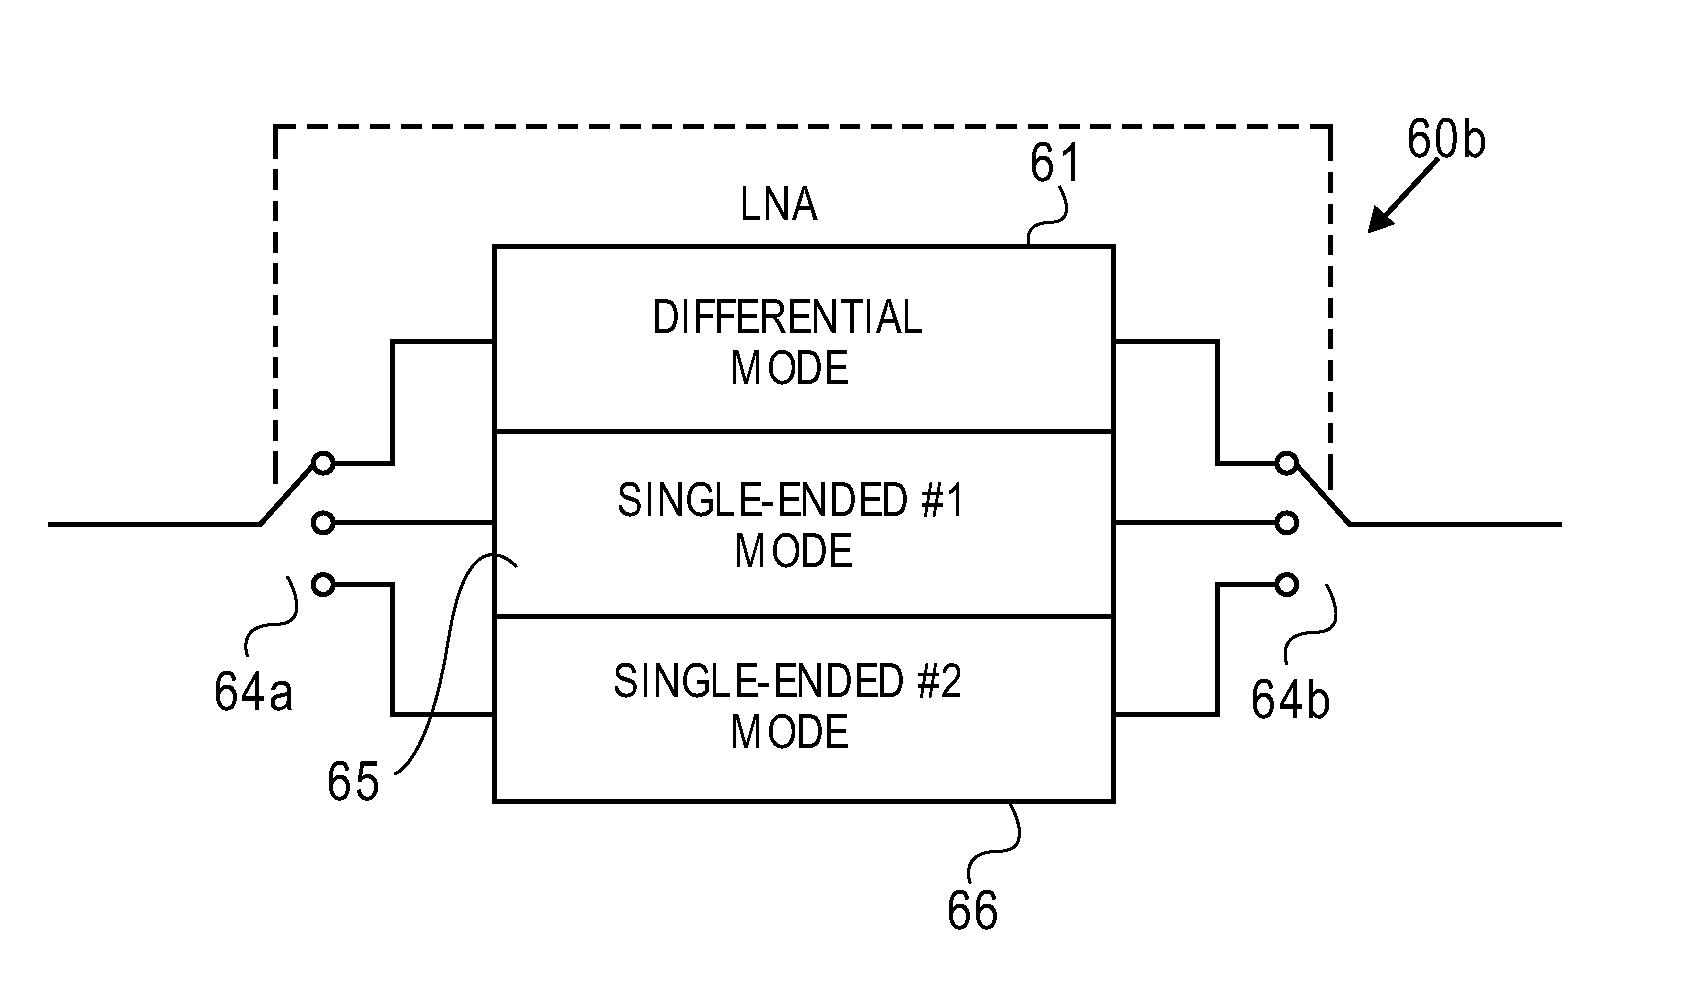 Selectable low noise amplifier for wireless communication